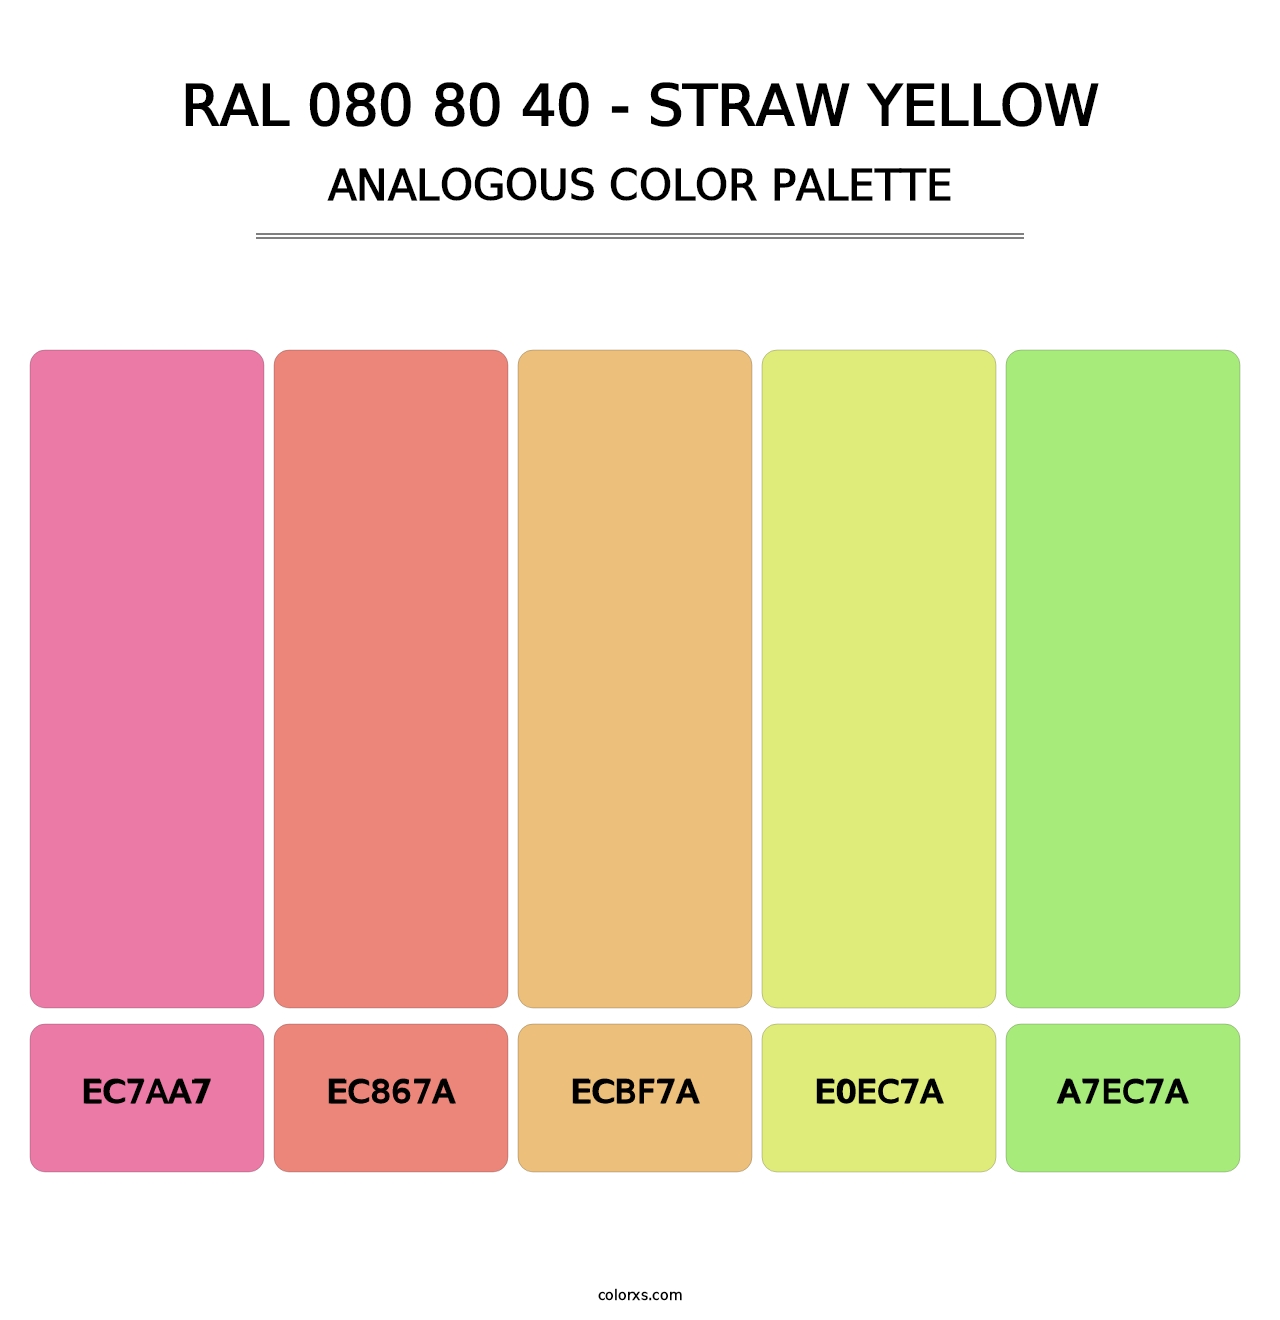 RAL 080 80 40 - Straw Yellow - Analogous Color Palette